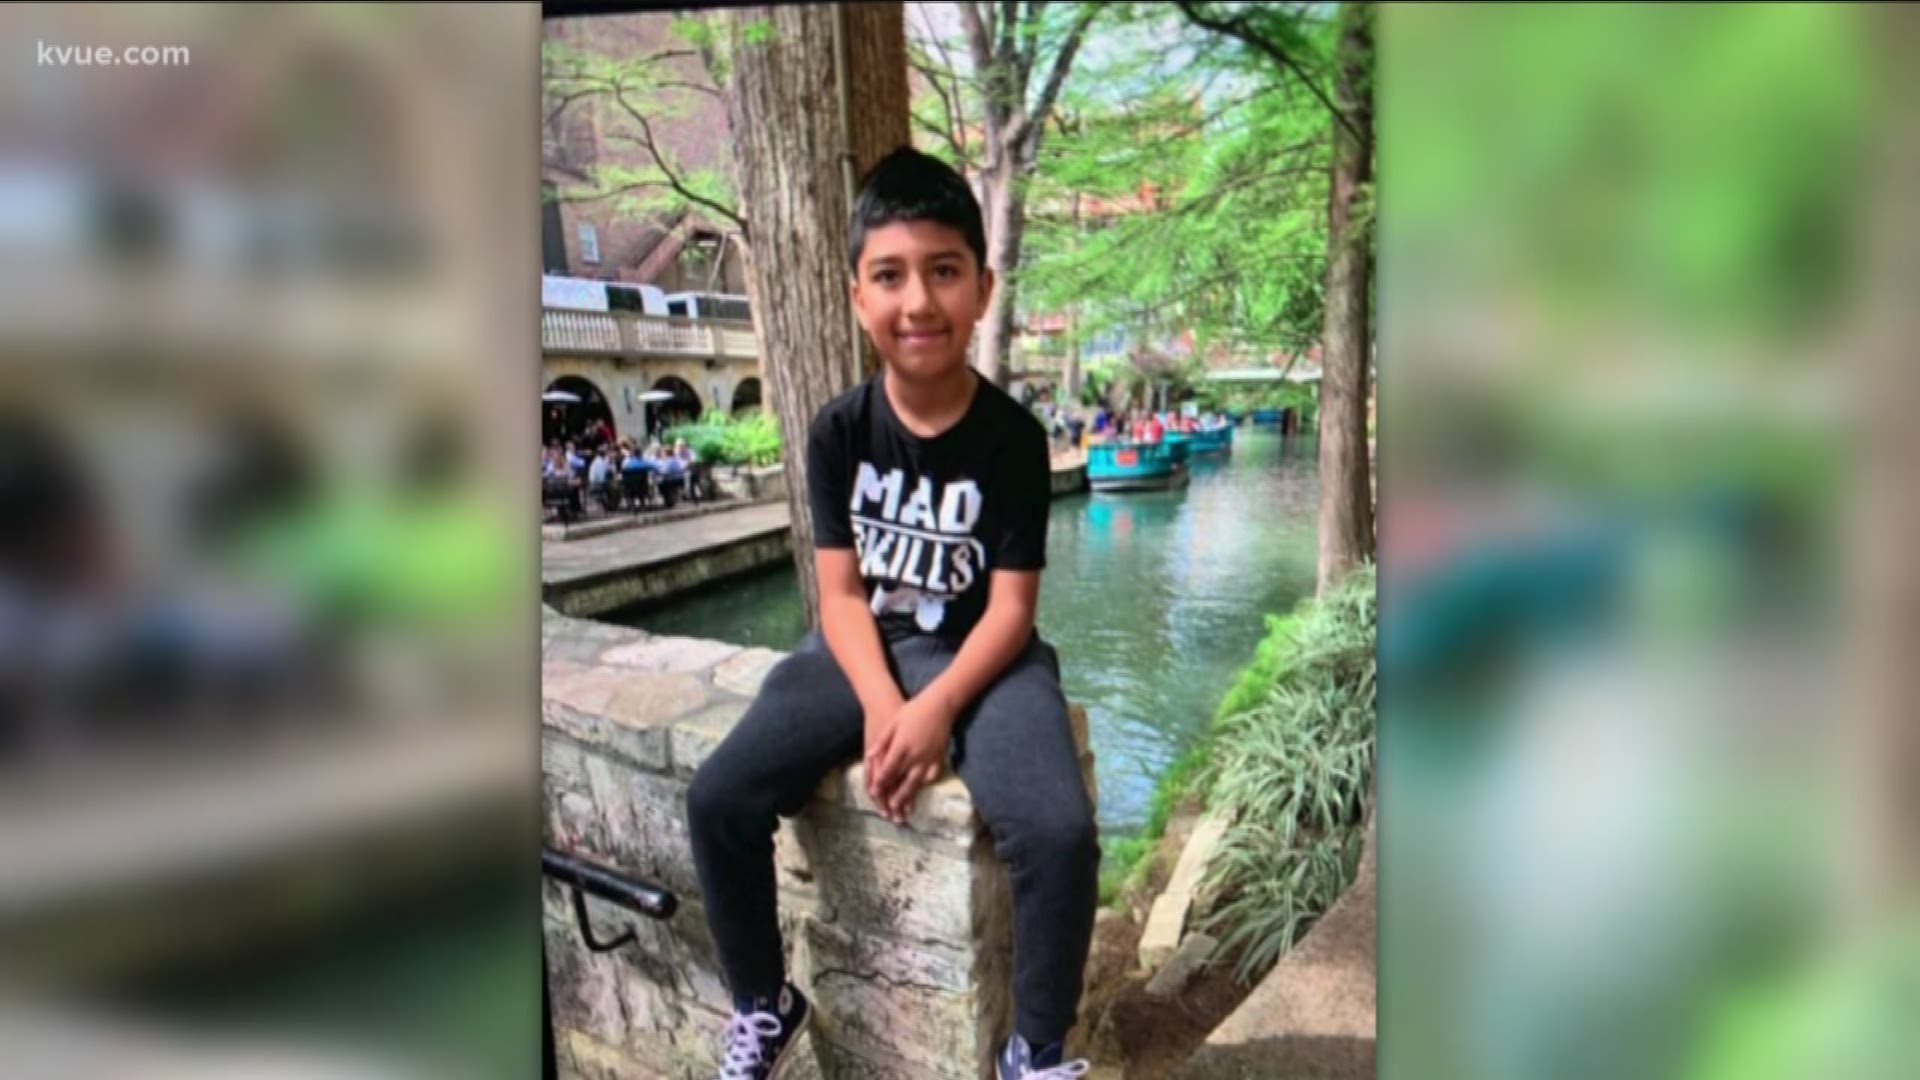 Austin police said early Thursday morning they were searching for a missing boy who was last seen Wednesday evening.